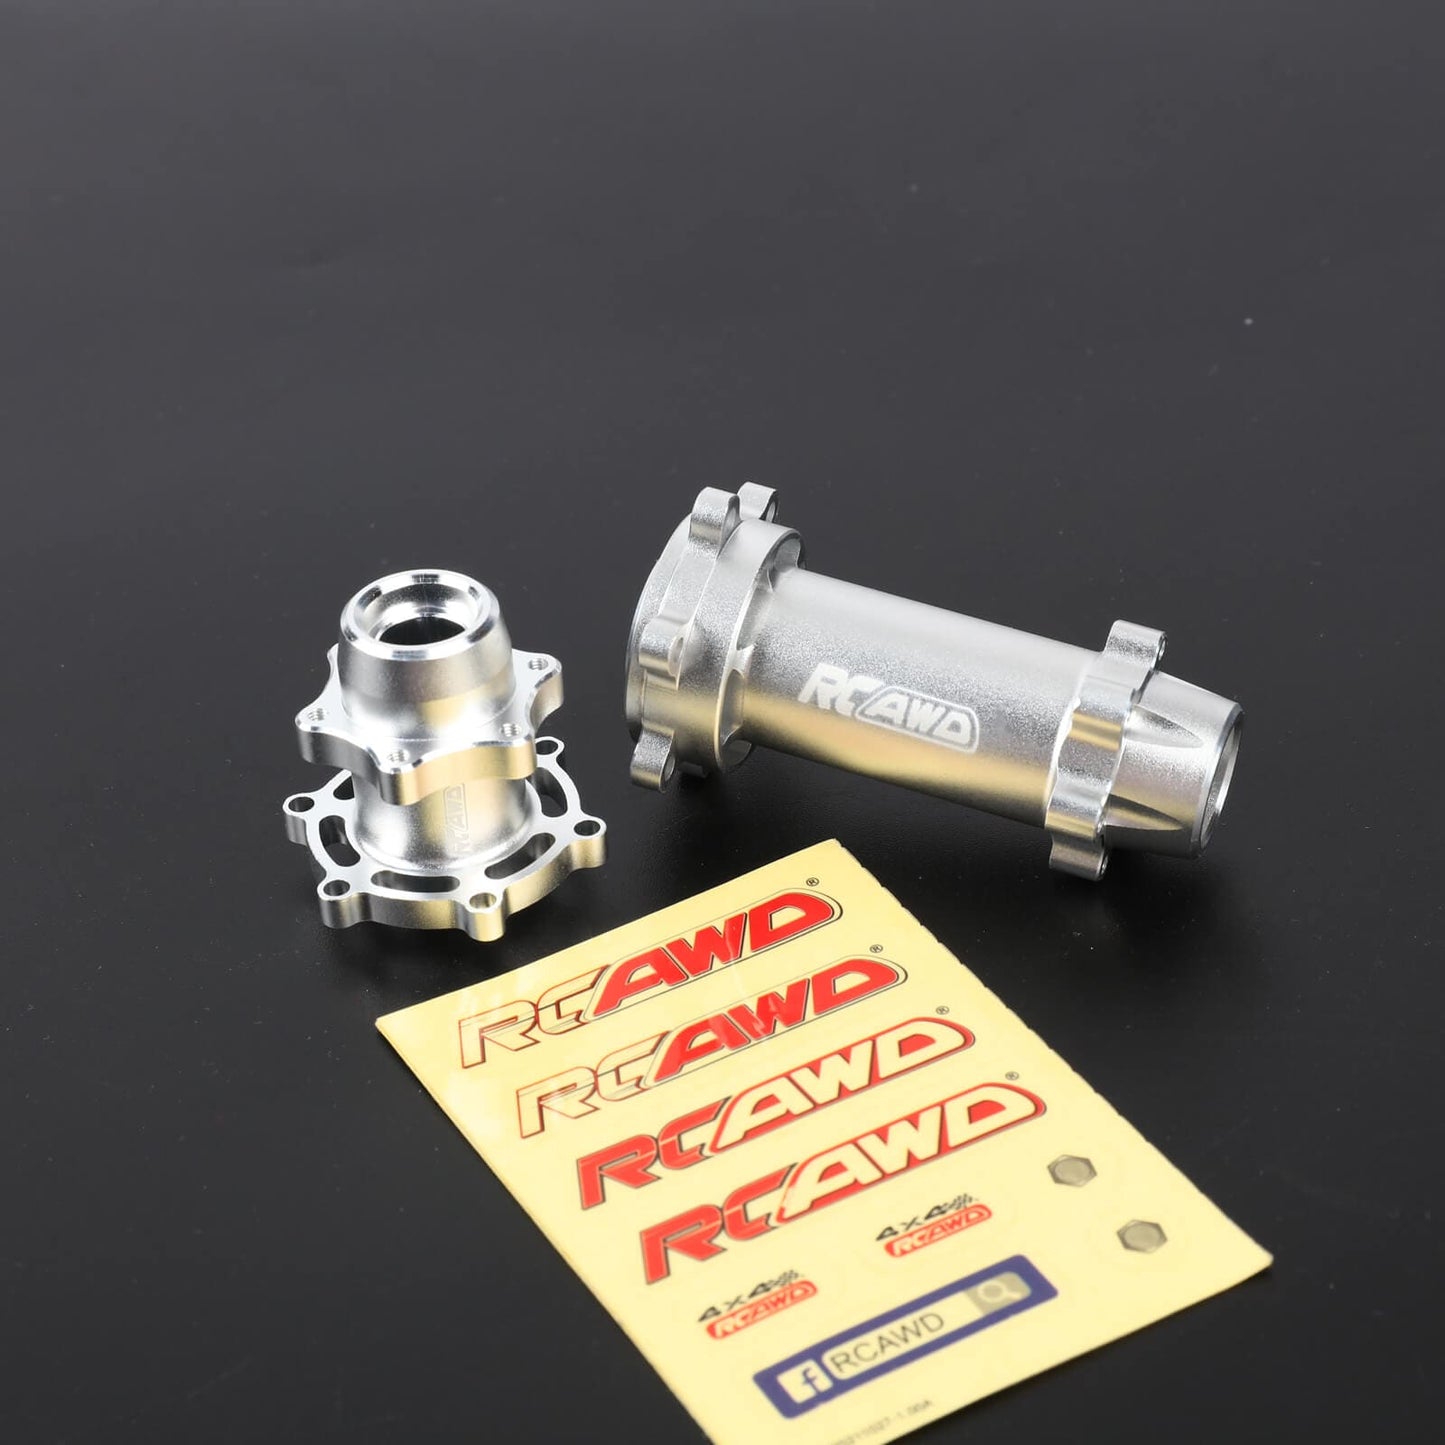 RCAWD 1/4 Losi Promoto - MX Upgrades Aluminum Hub Set for losi Motorcycle LOS362005S - RCAWD